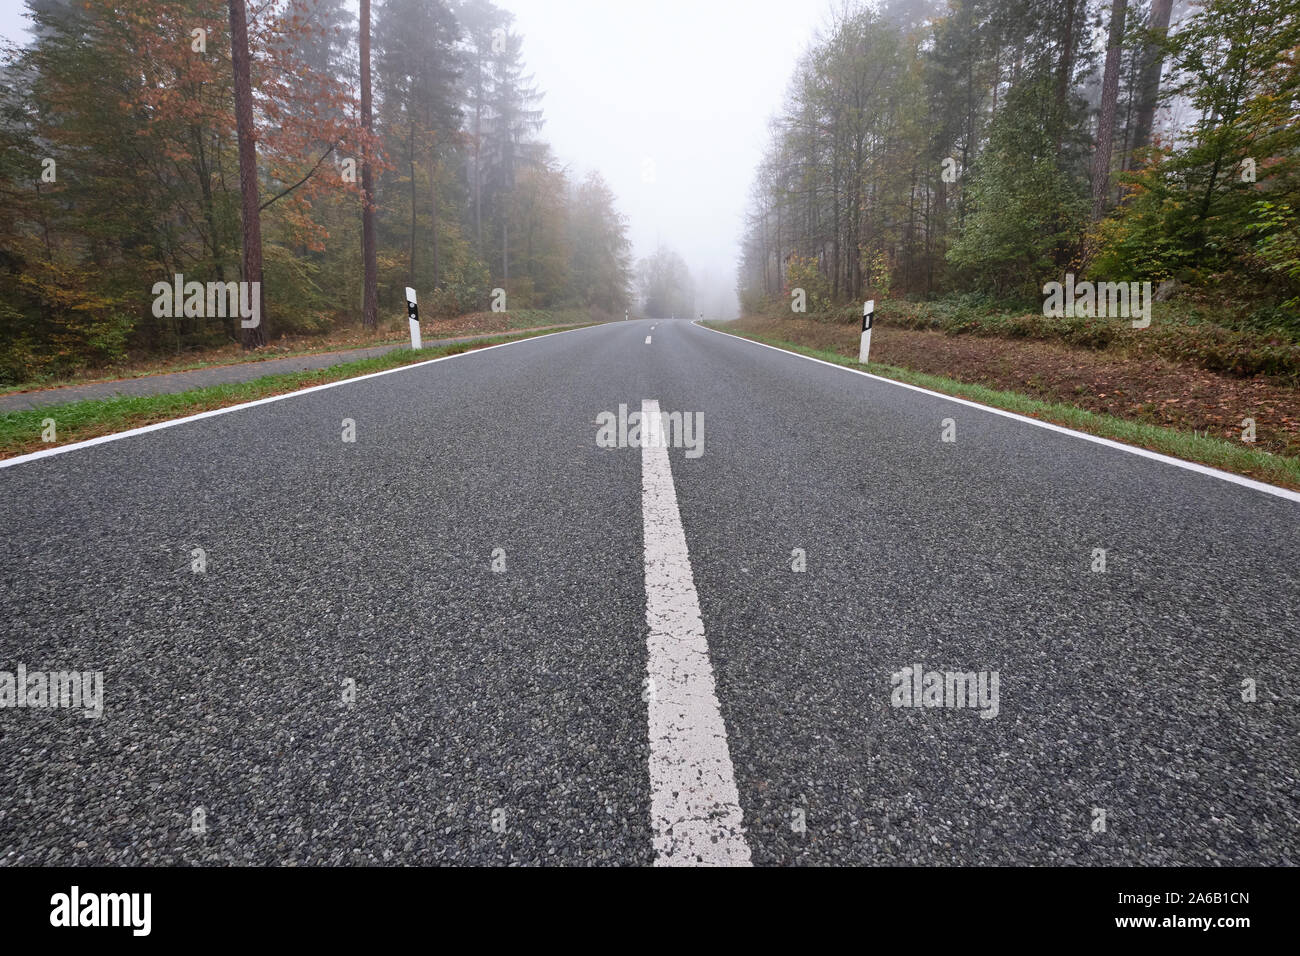 Diminishing perspective of a lonesome empty countryside road with delineators and a bicycle path along leading through a forest with dense fog. Seen i Stock Photo